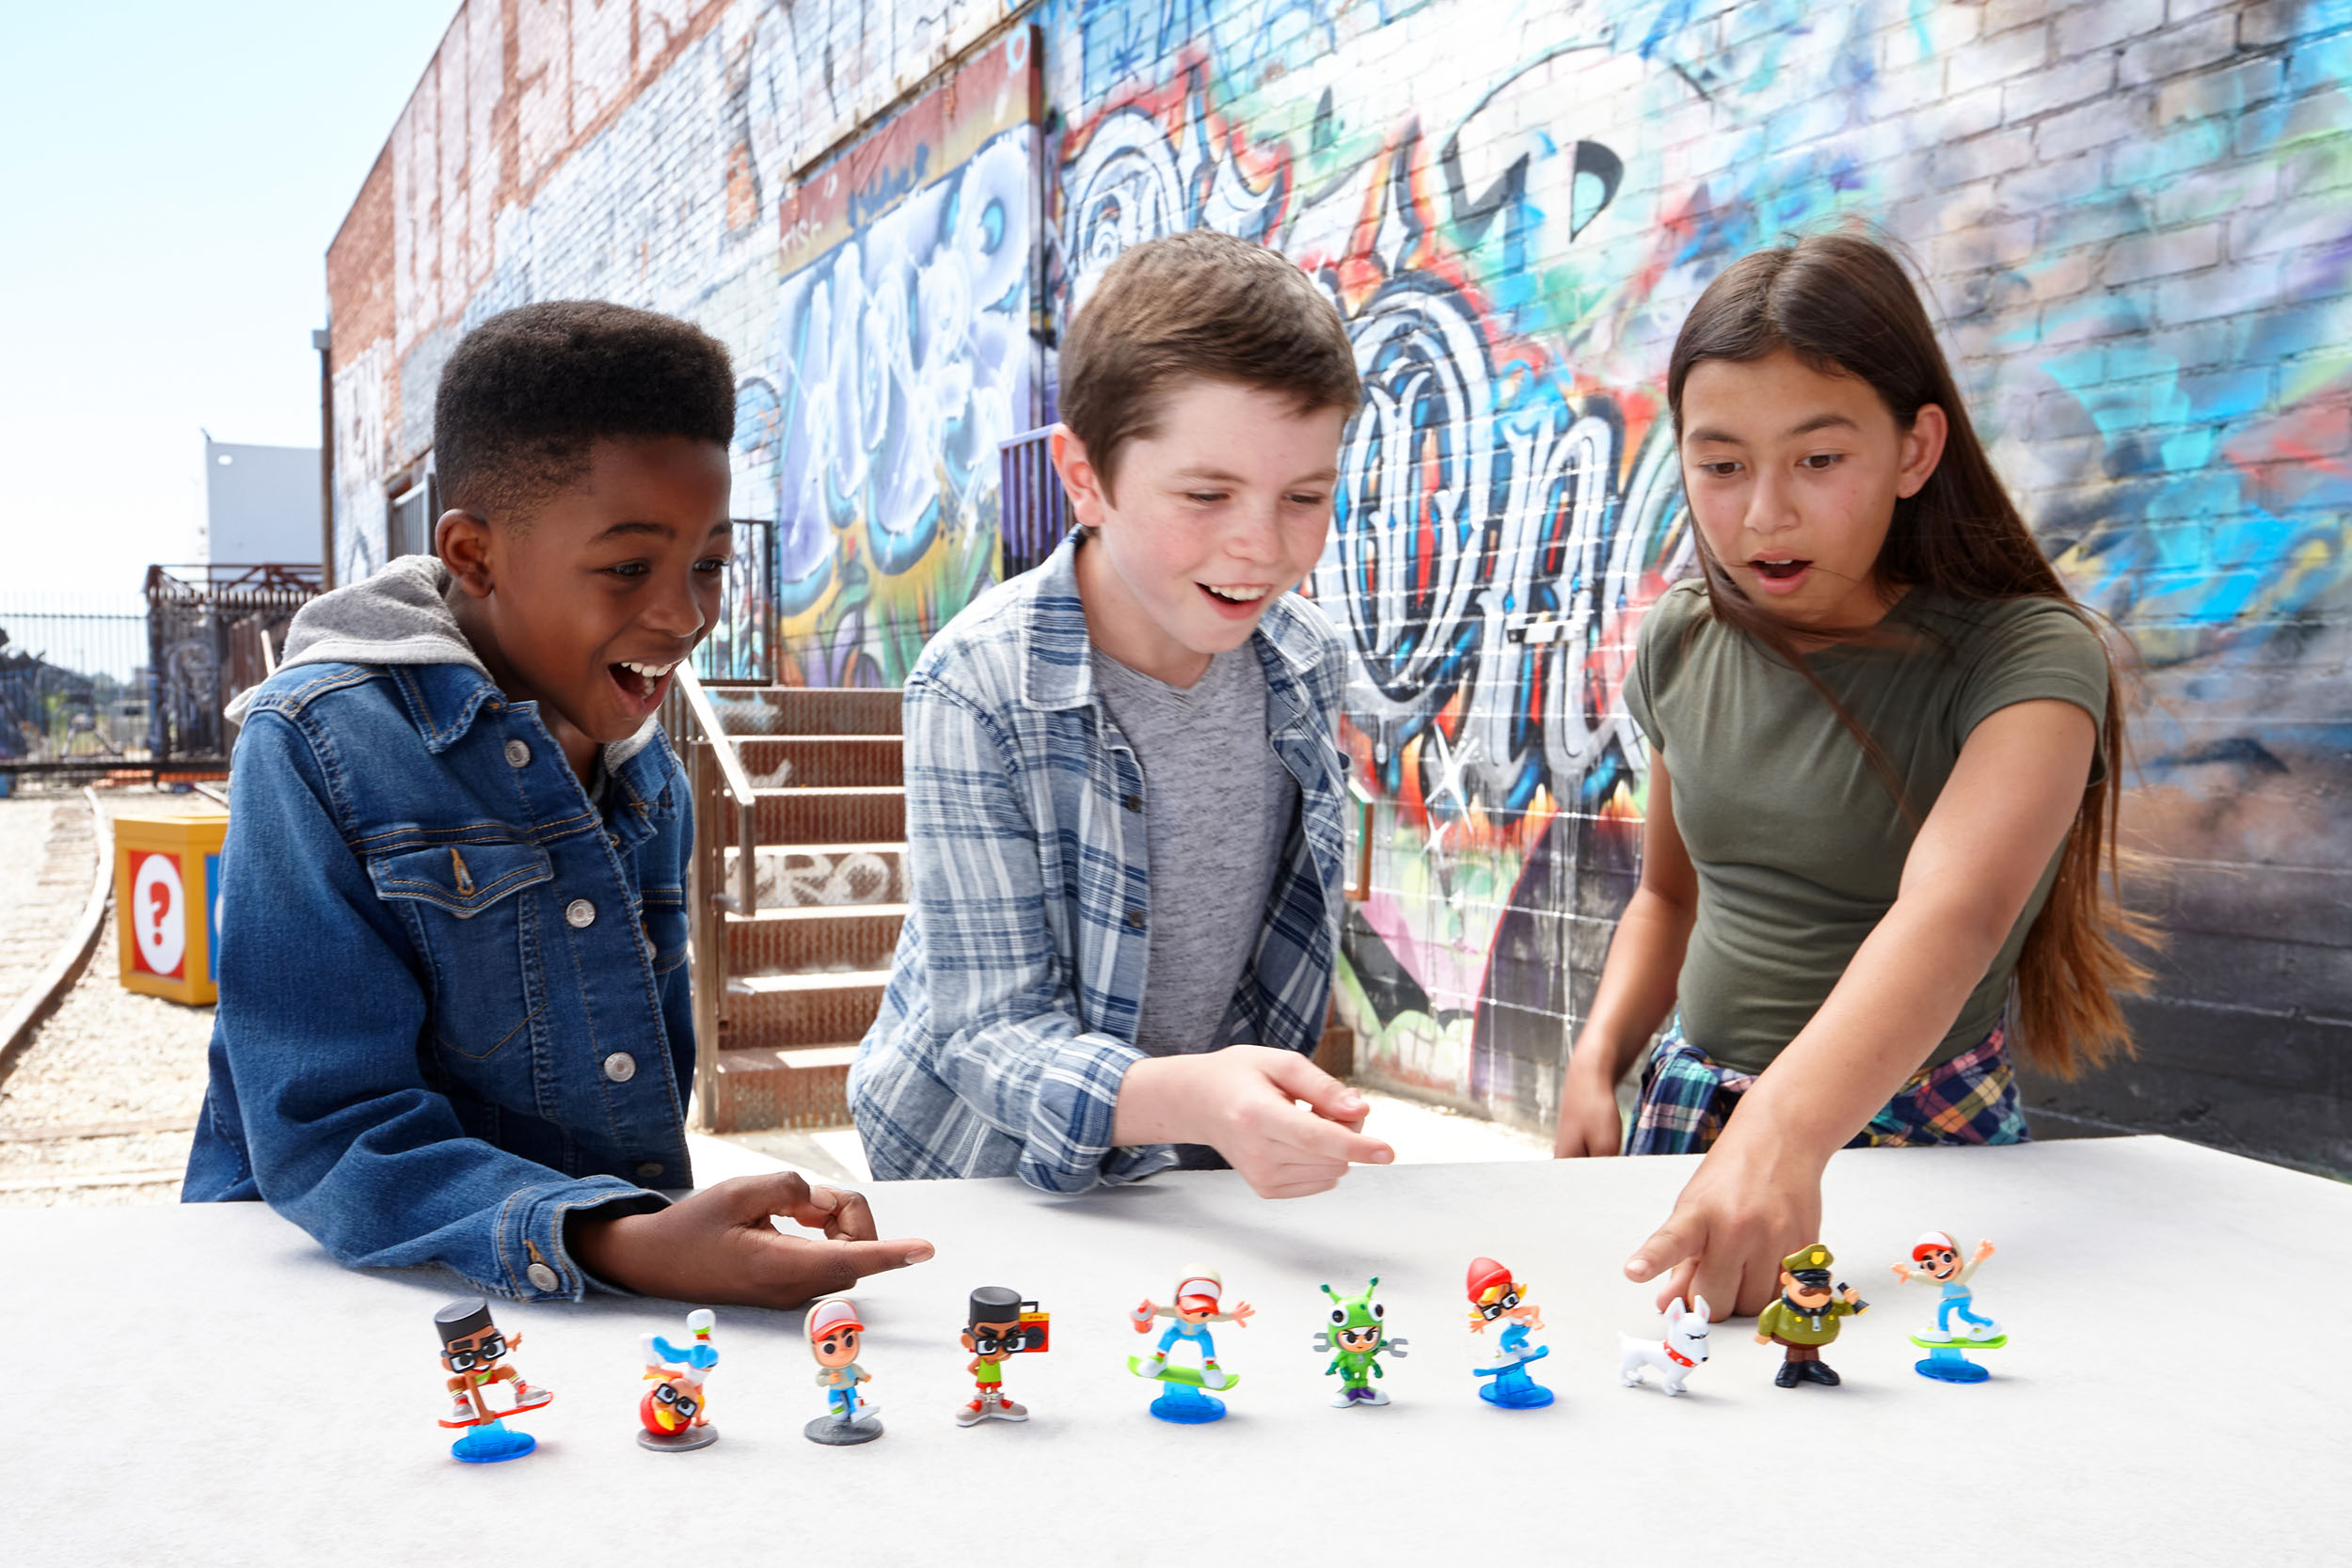 Subway Surfers Mini Figures - Each Sold Separately